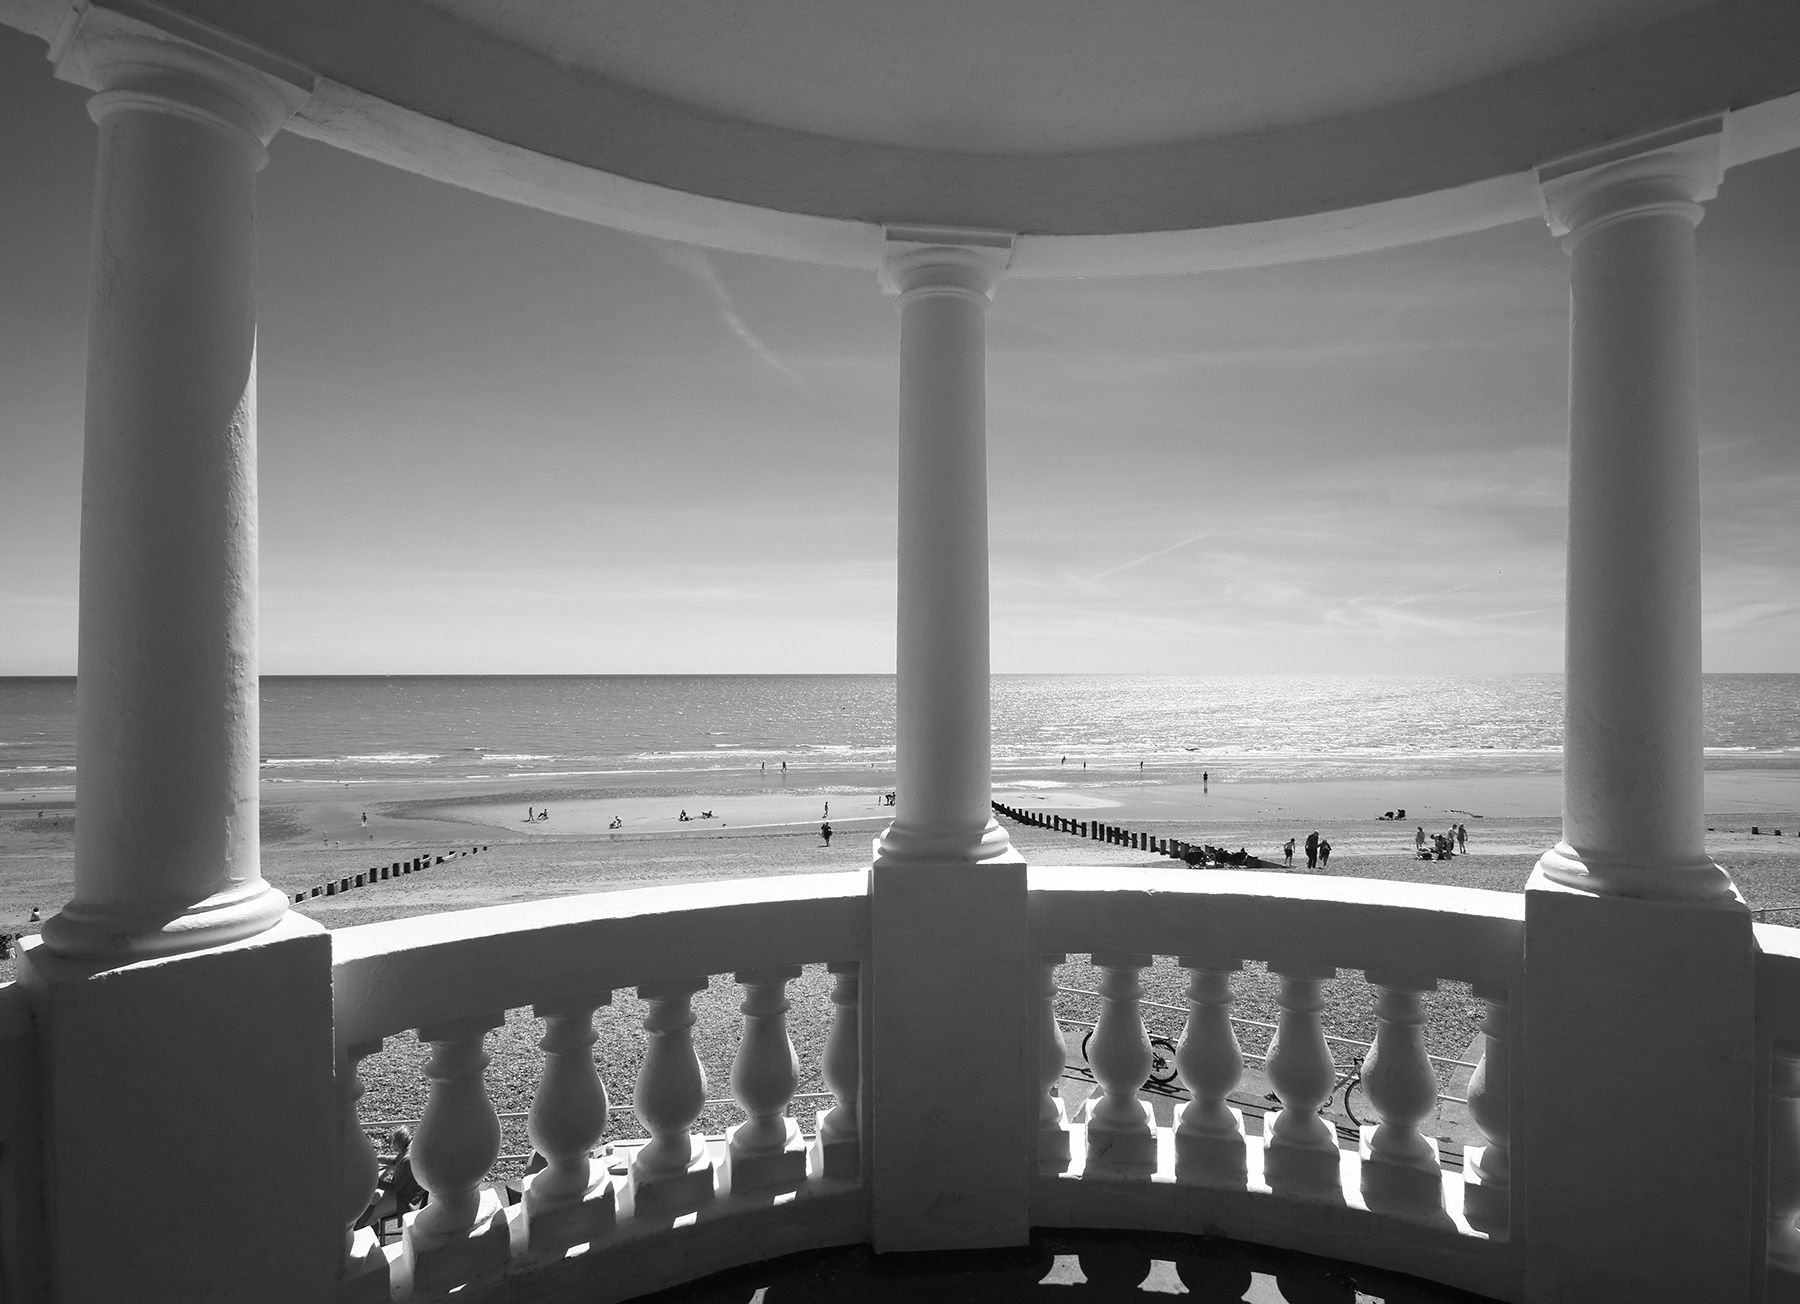 Bexhill Bandstand